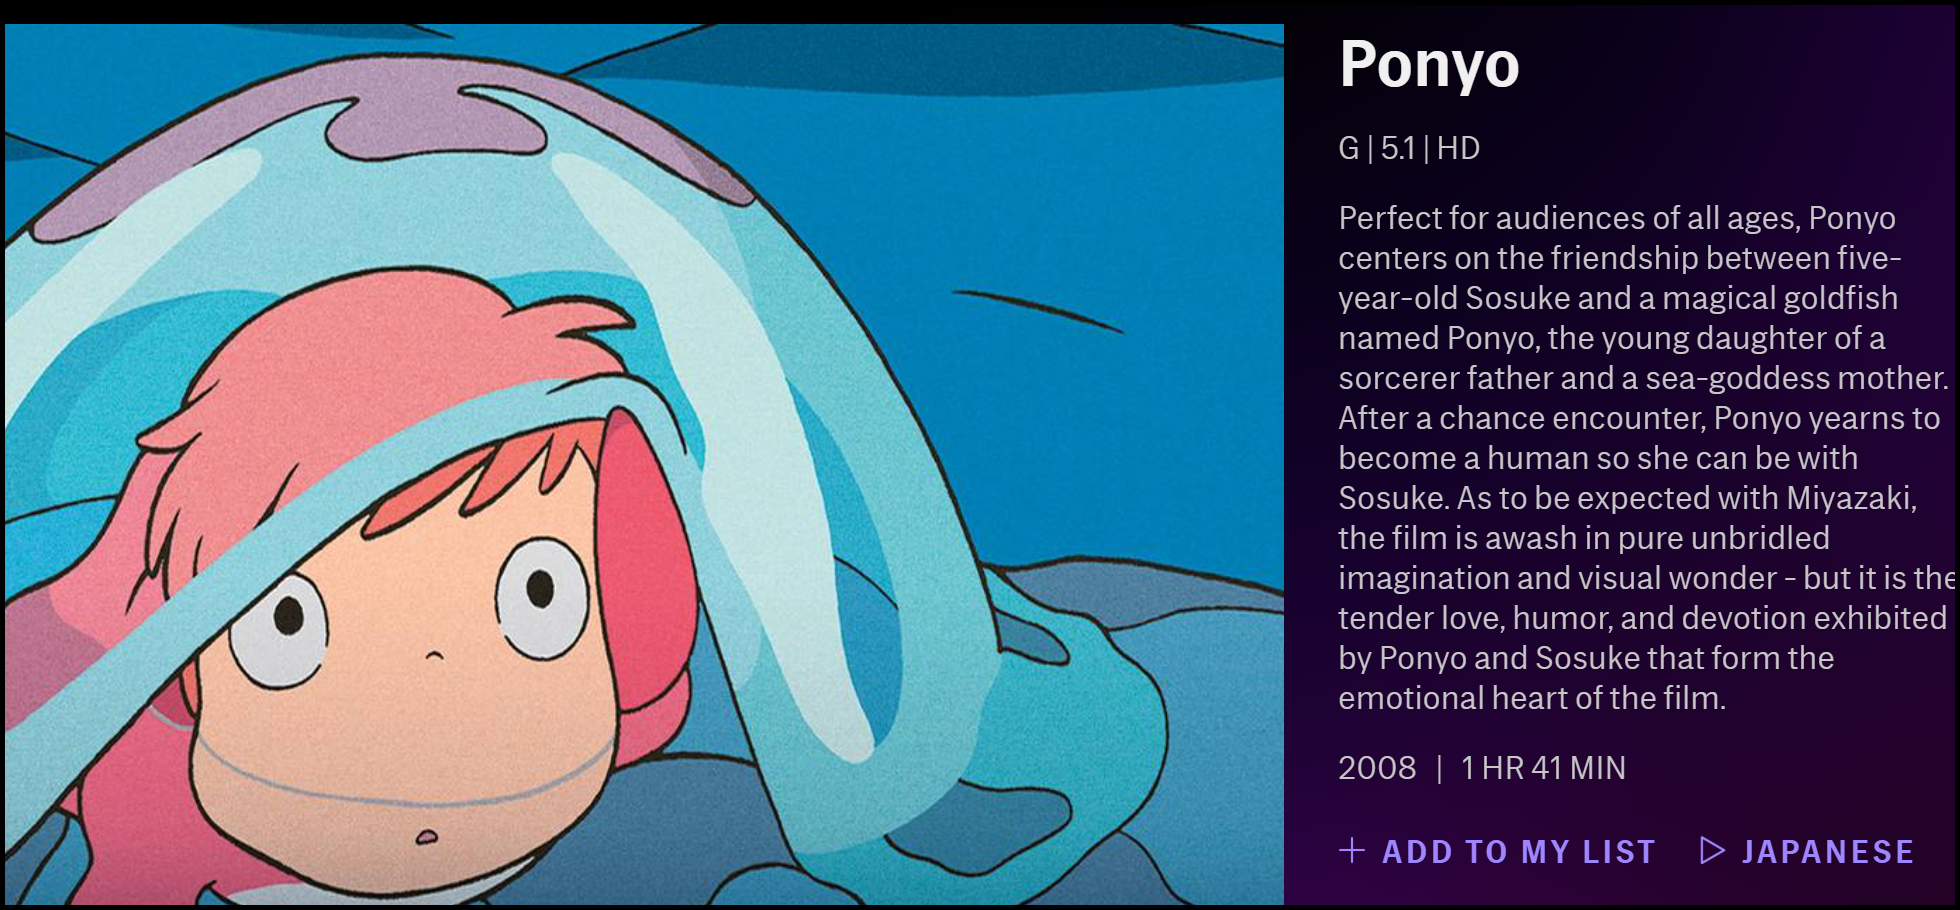 The description of Ponyo on HBO Max.